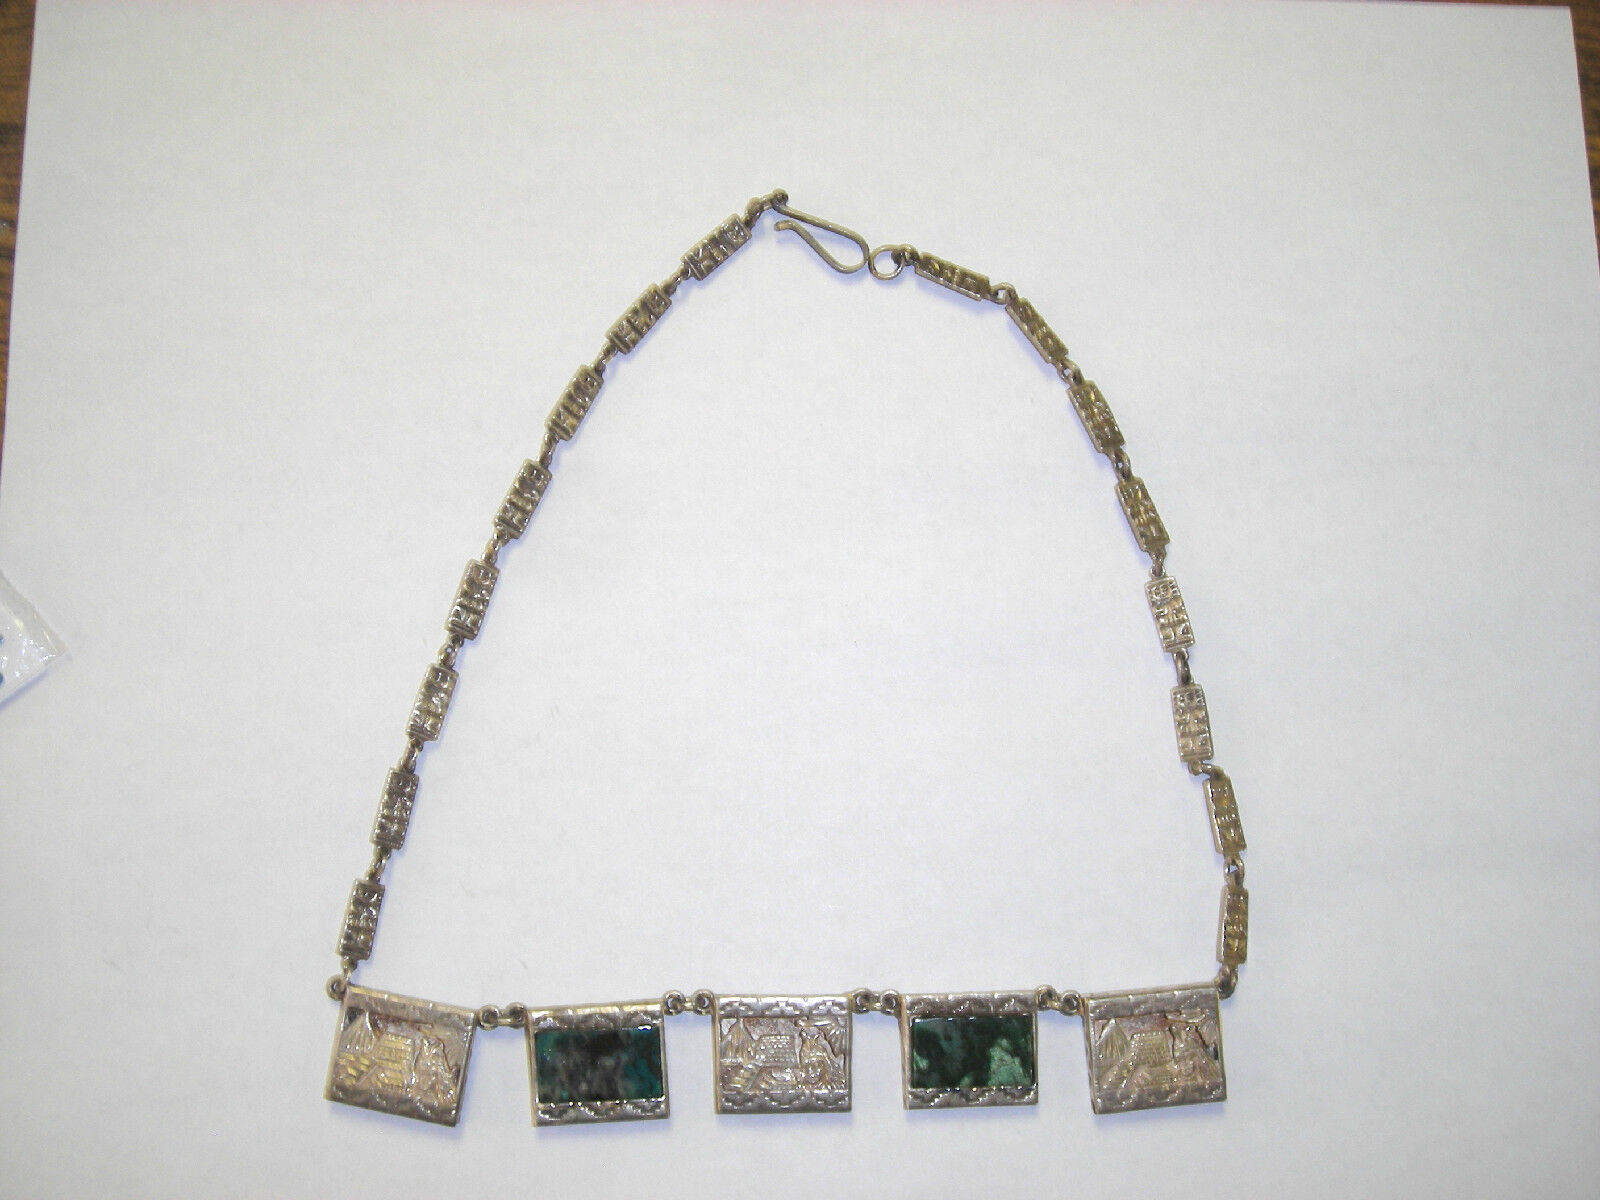 Vintage Aztec Mayan Mexico Sterling Necklace with Inlaid Stone Necklace 